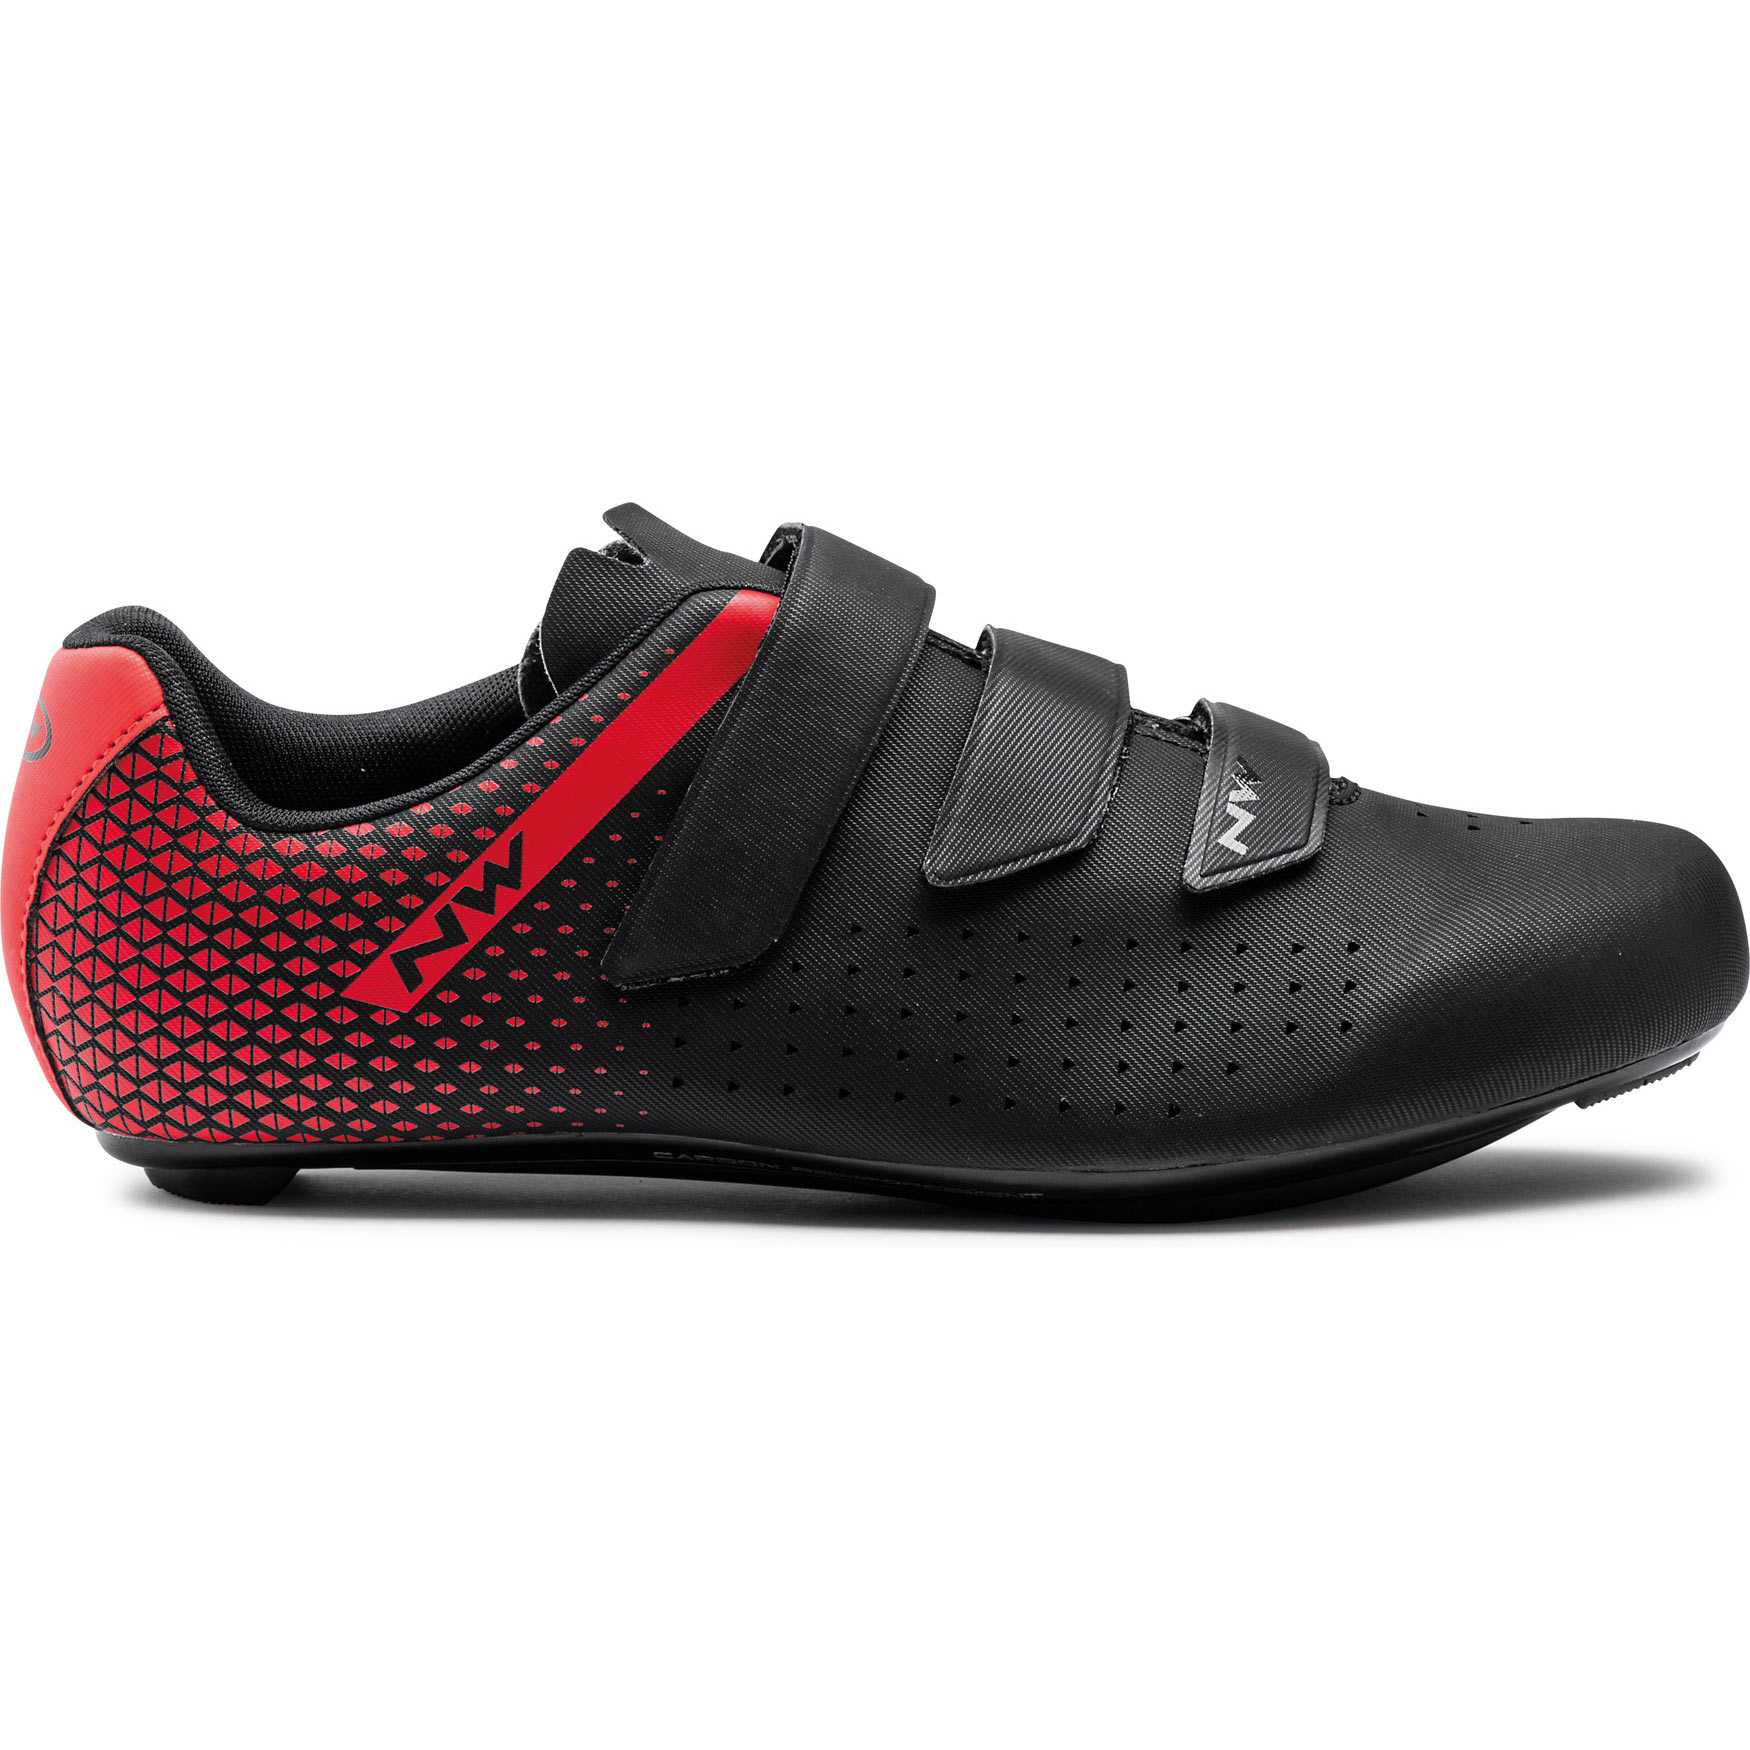 Image of Northwave Core 2 Road Shoe - black/red 15